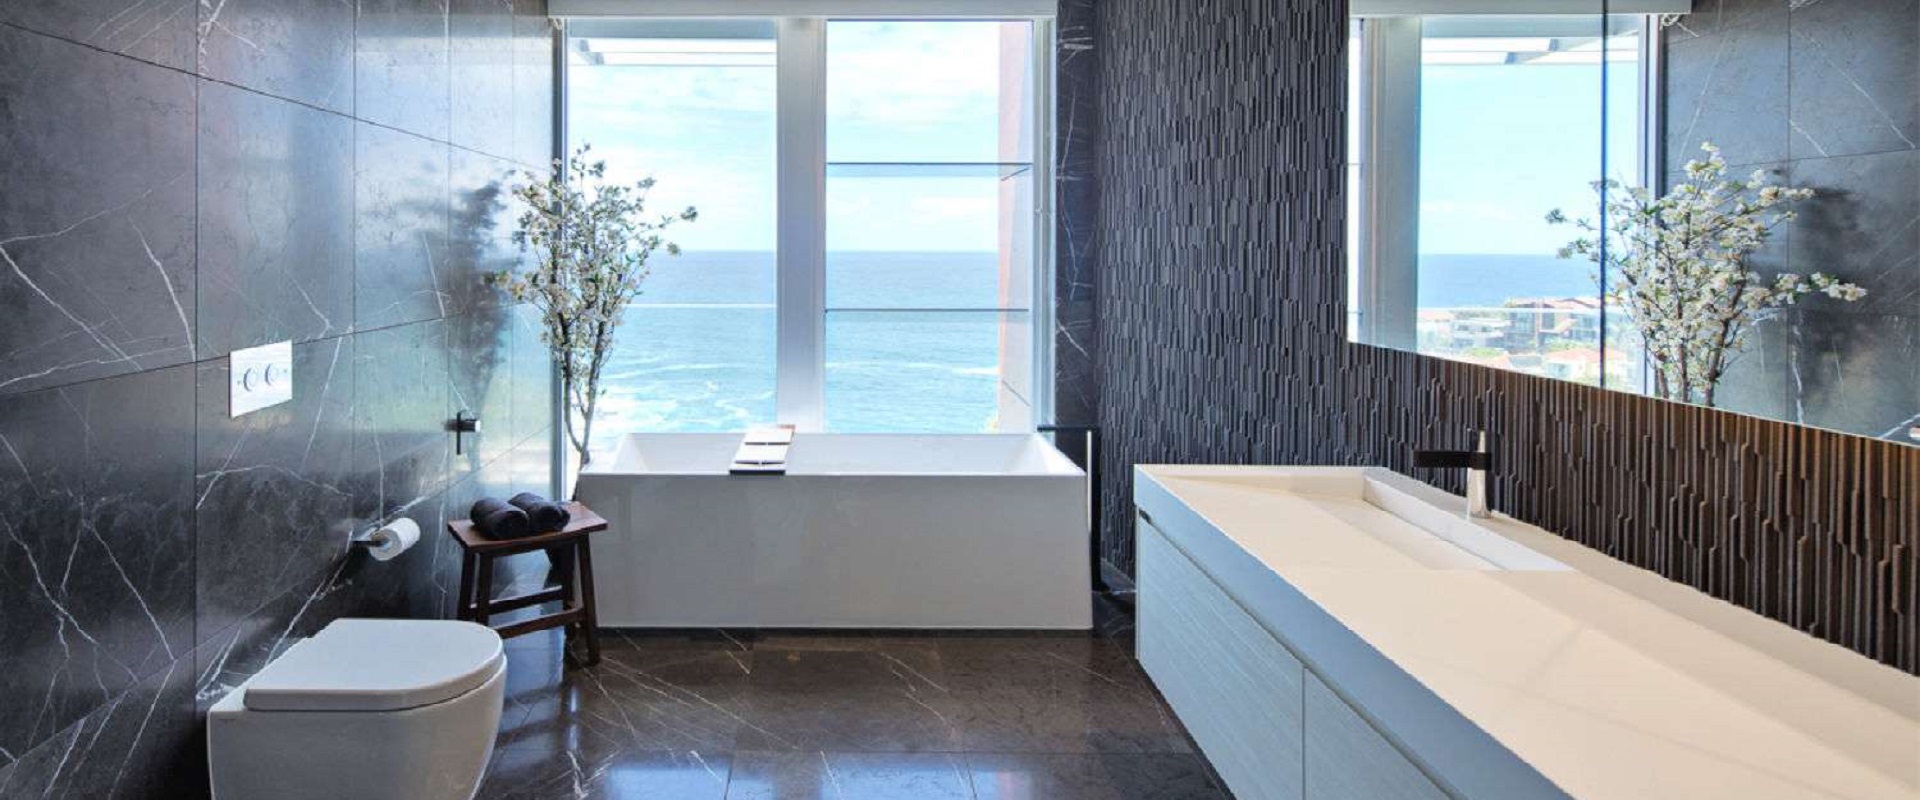 Bathroom Remodeling Miami - Miami First Remodeling 18+Yrs Exp